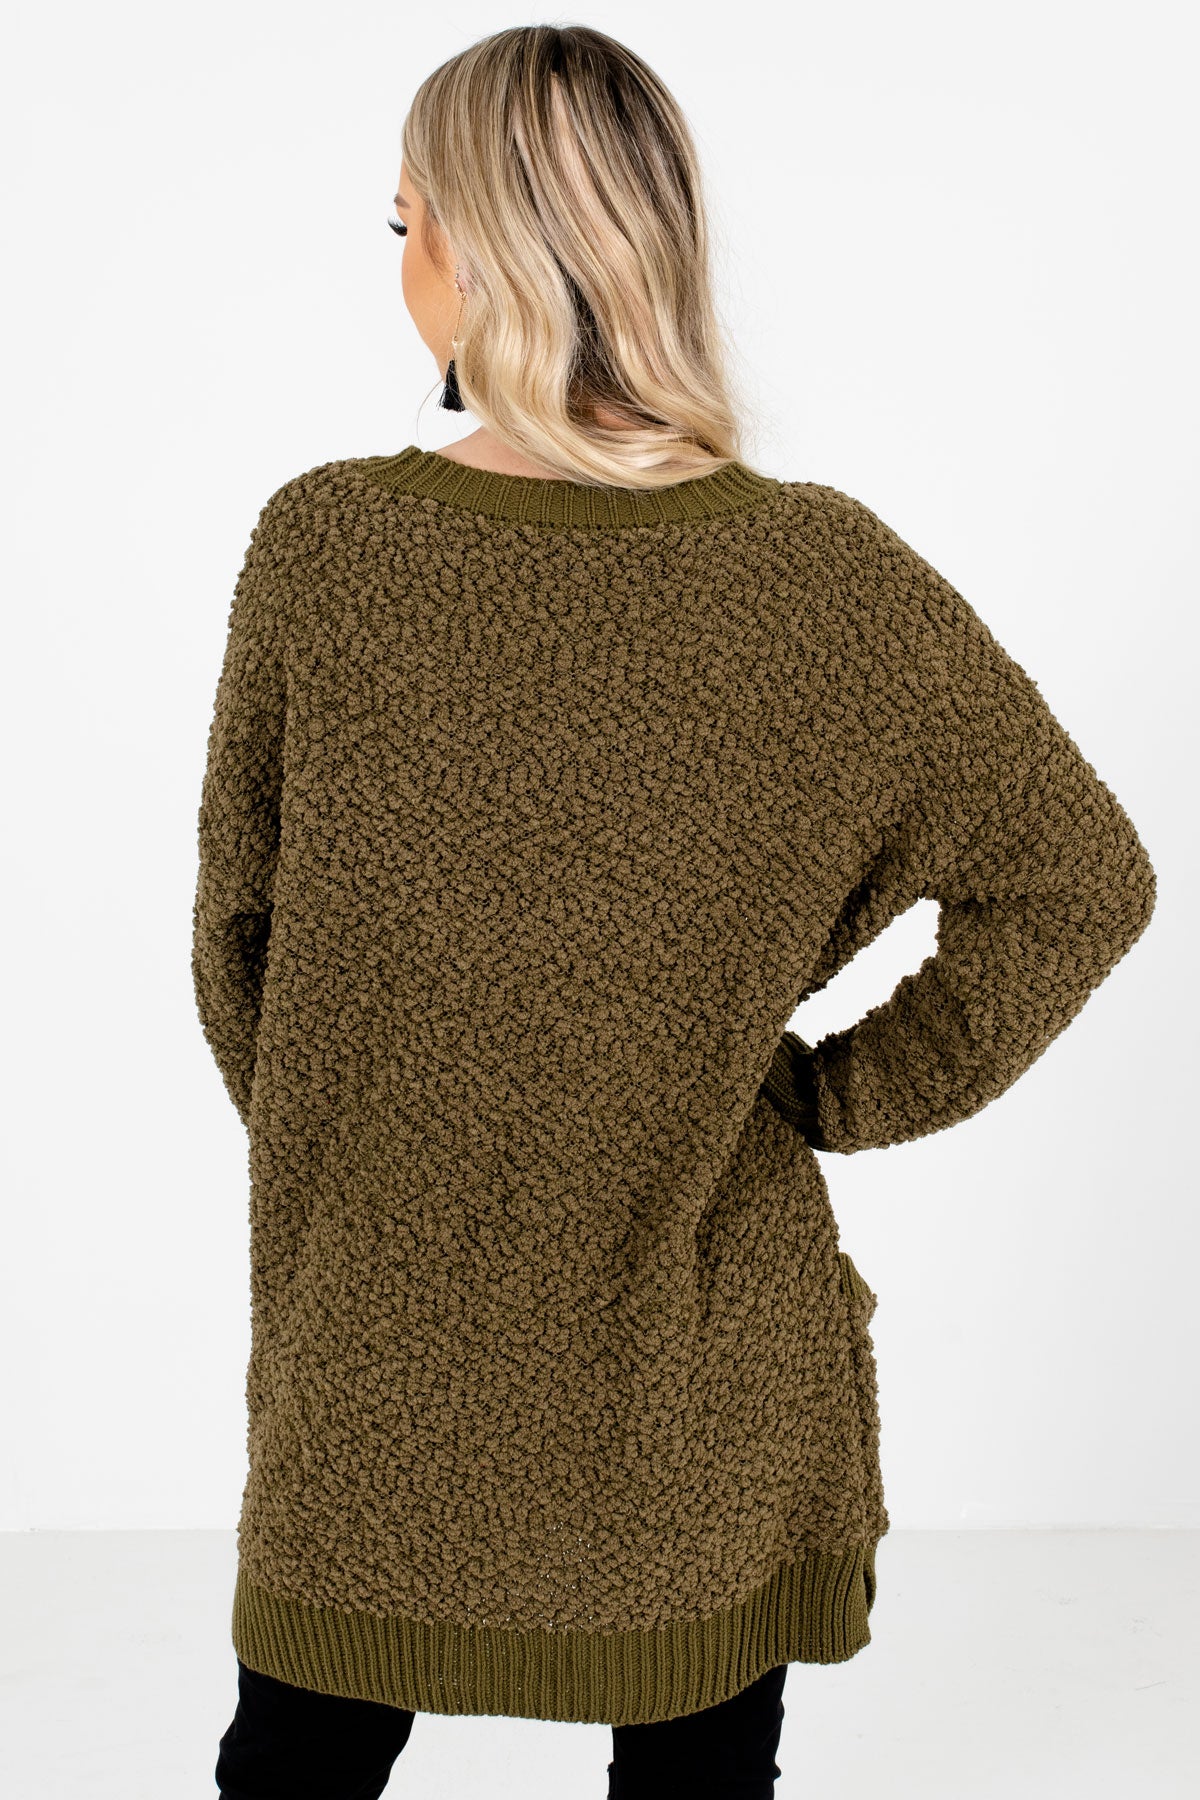 Women's Olive Green Oversized Fit Boutique Tops 